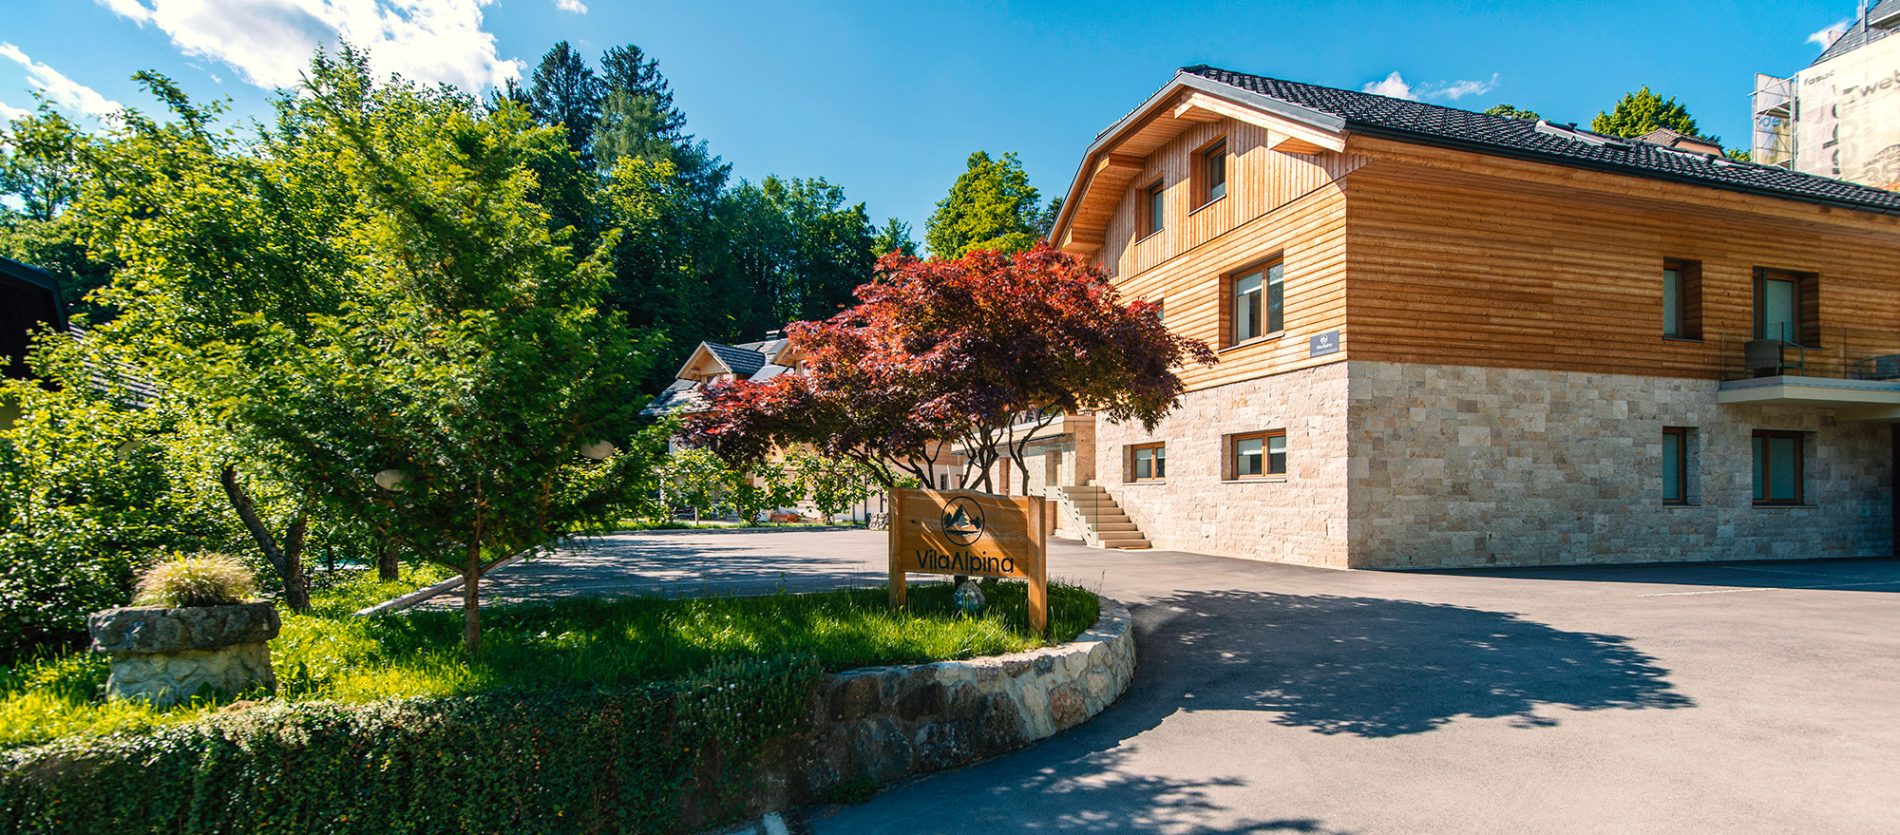 Stay in Slovenia's Most Beautiful Locations